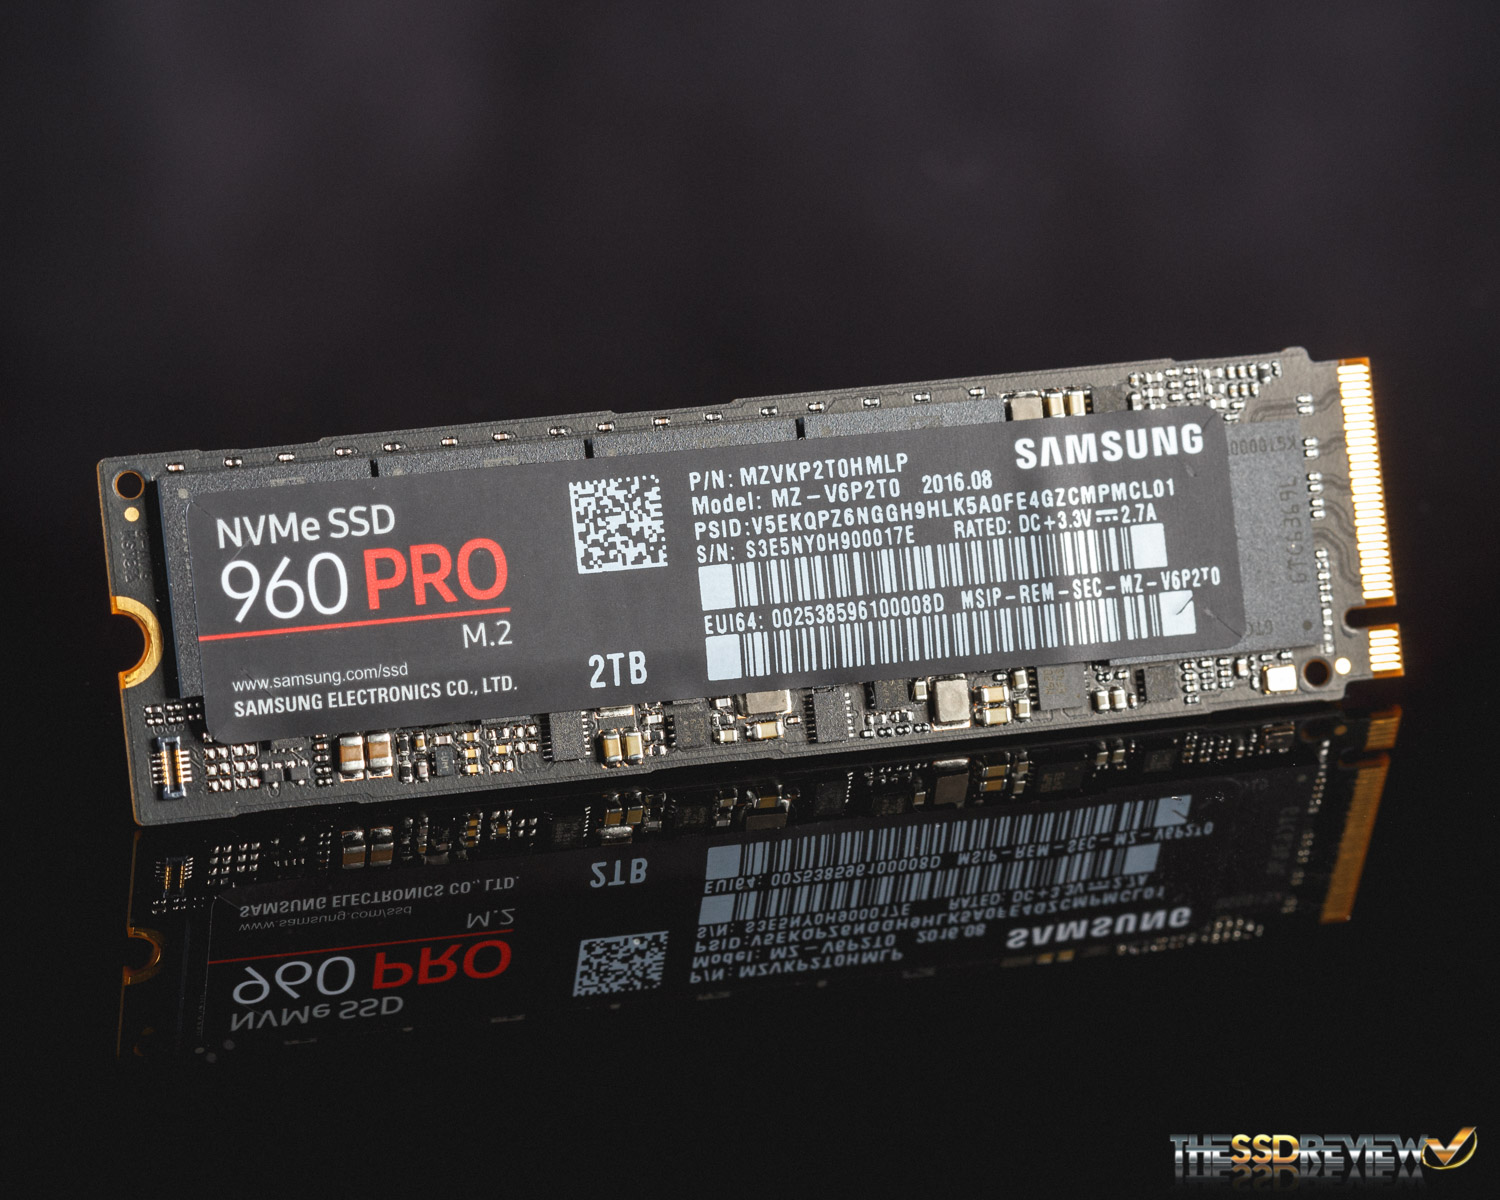 Samsung 960 Pro M.2 NVMe SSD Review (2TB) - Breathtaking Speed | SSD Review